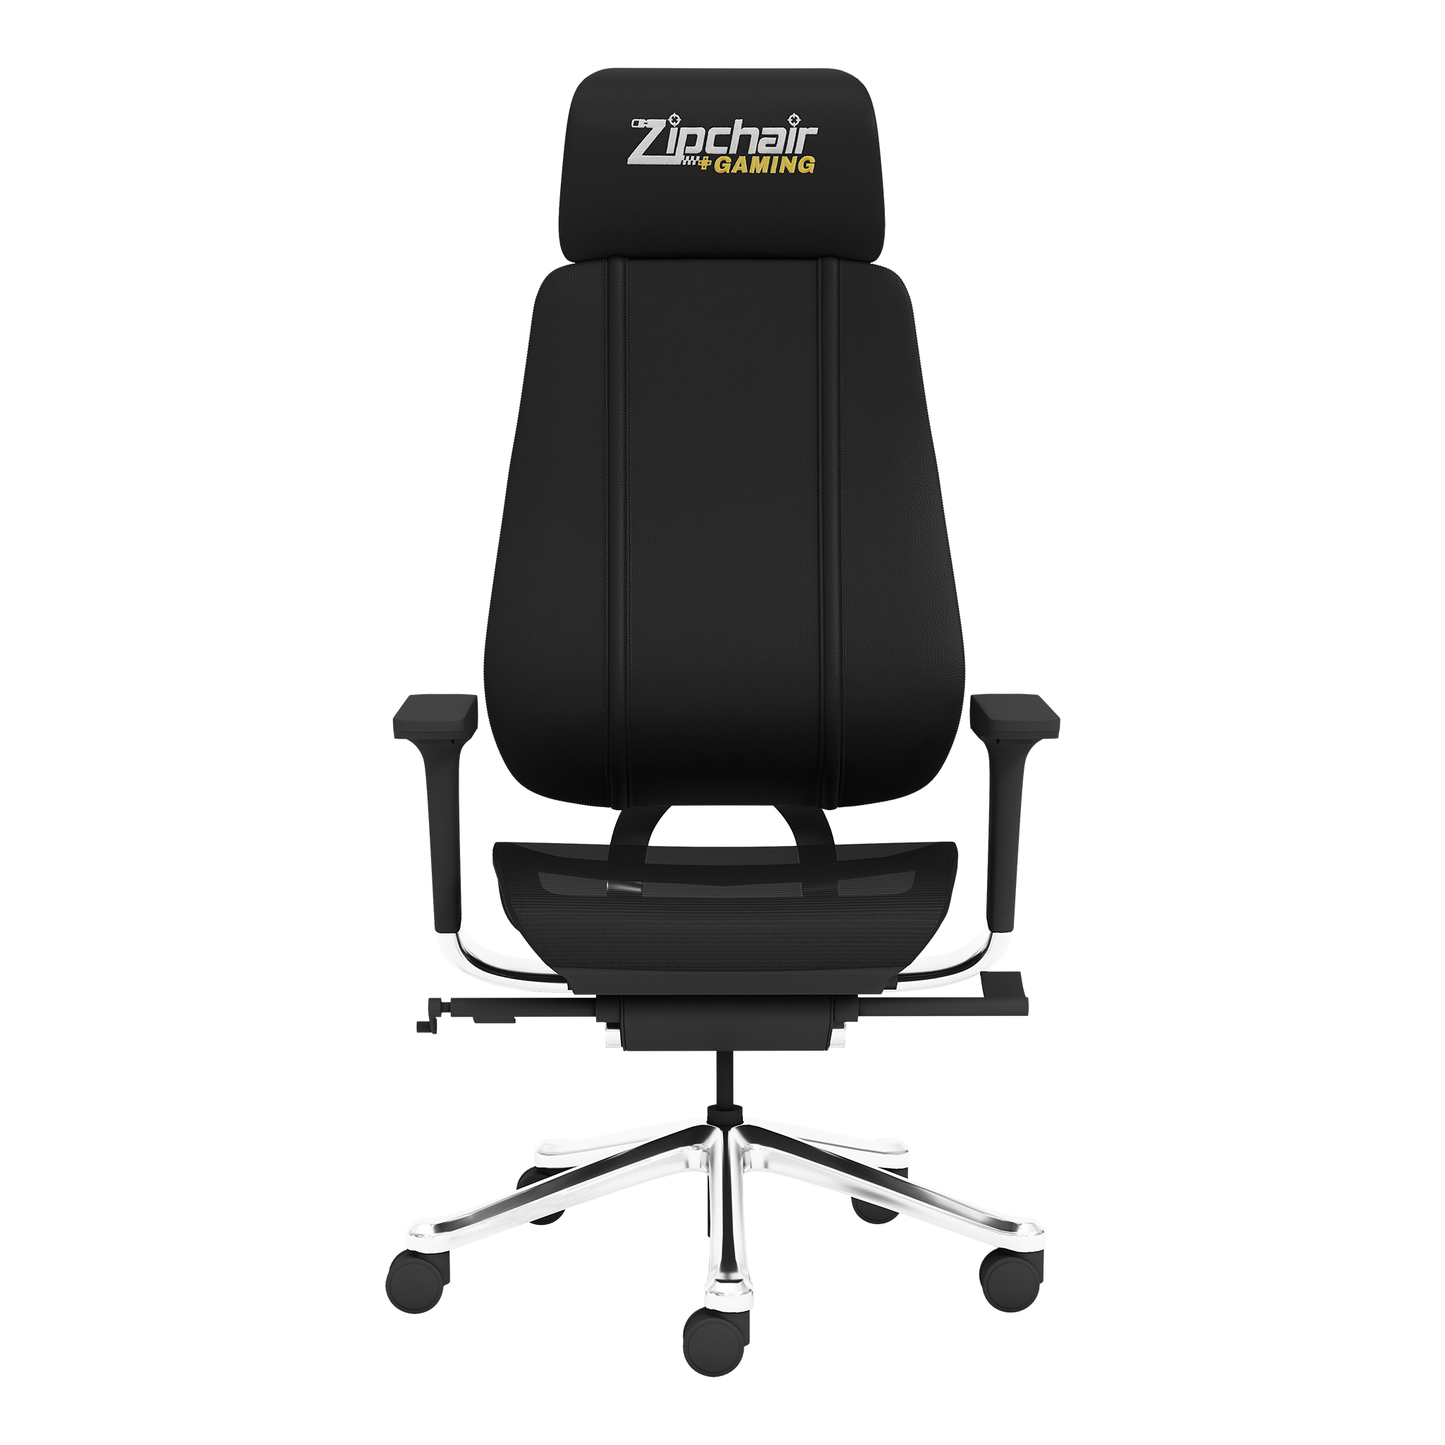 PhantomX Mesh Gaming Chair with Celtics Crossover Gaming Wordmark White [CAN ONLY BE SHIPPED TO MASSACHUSETTS]